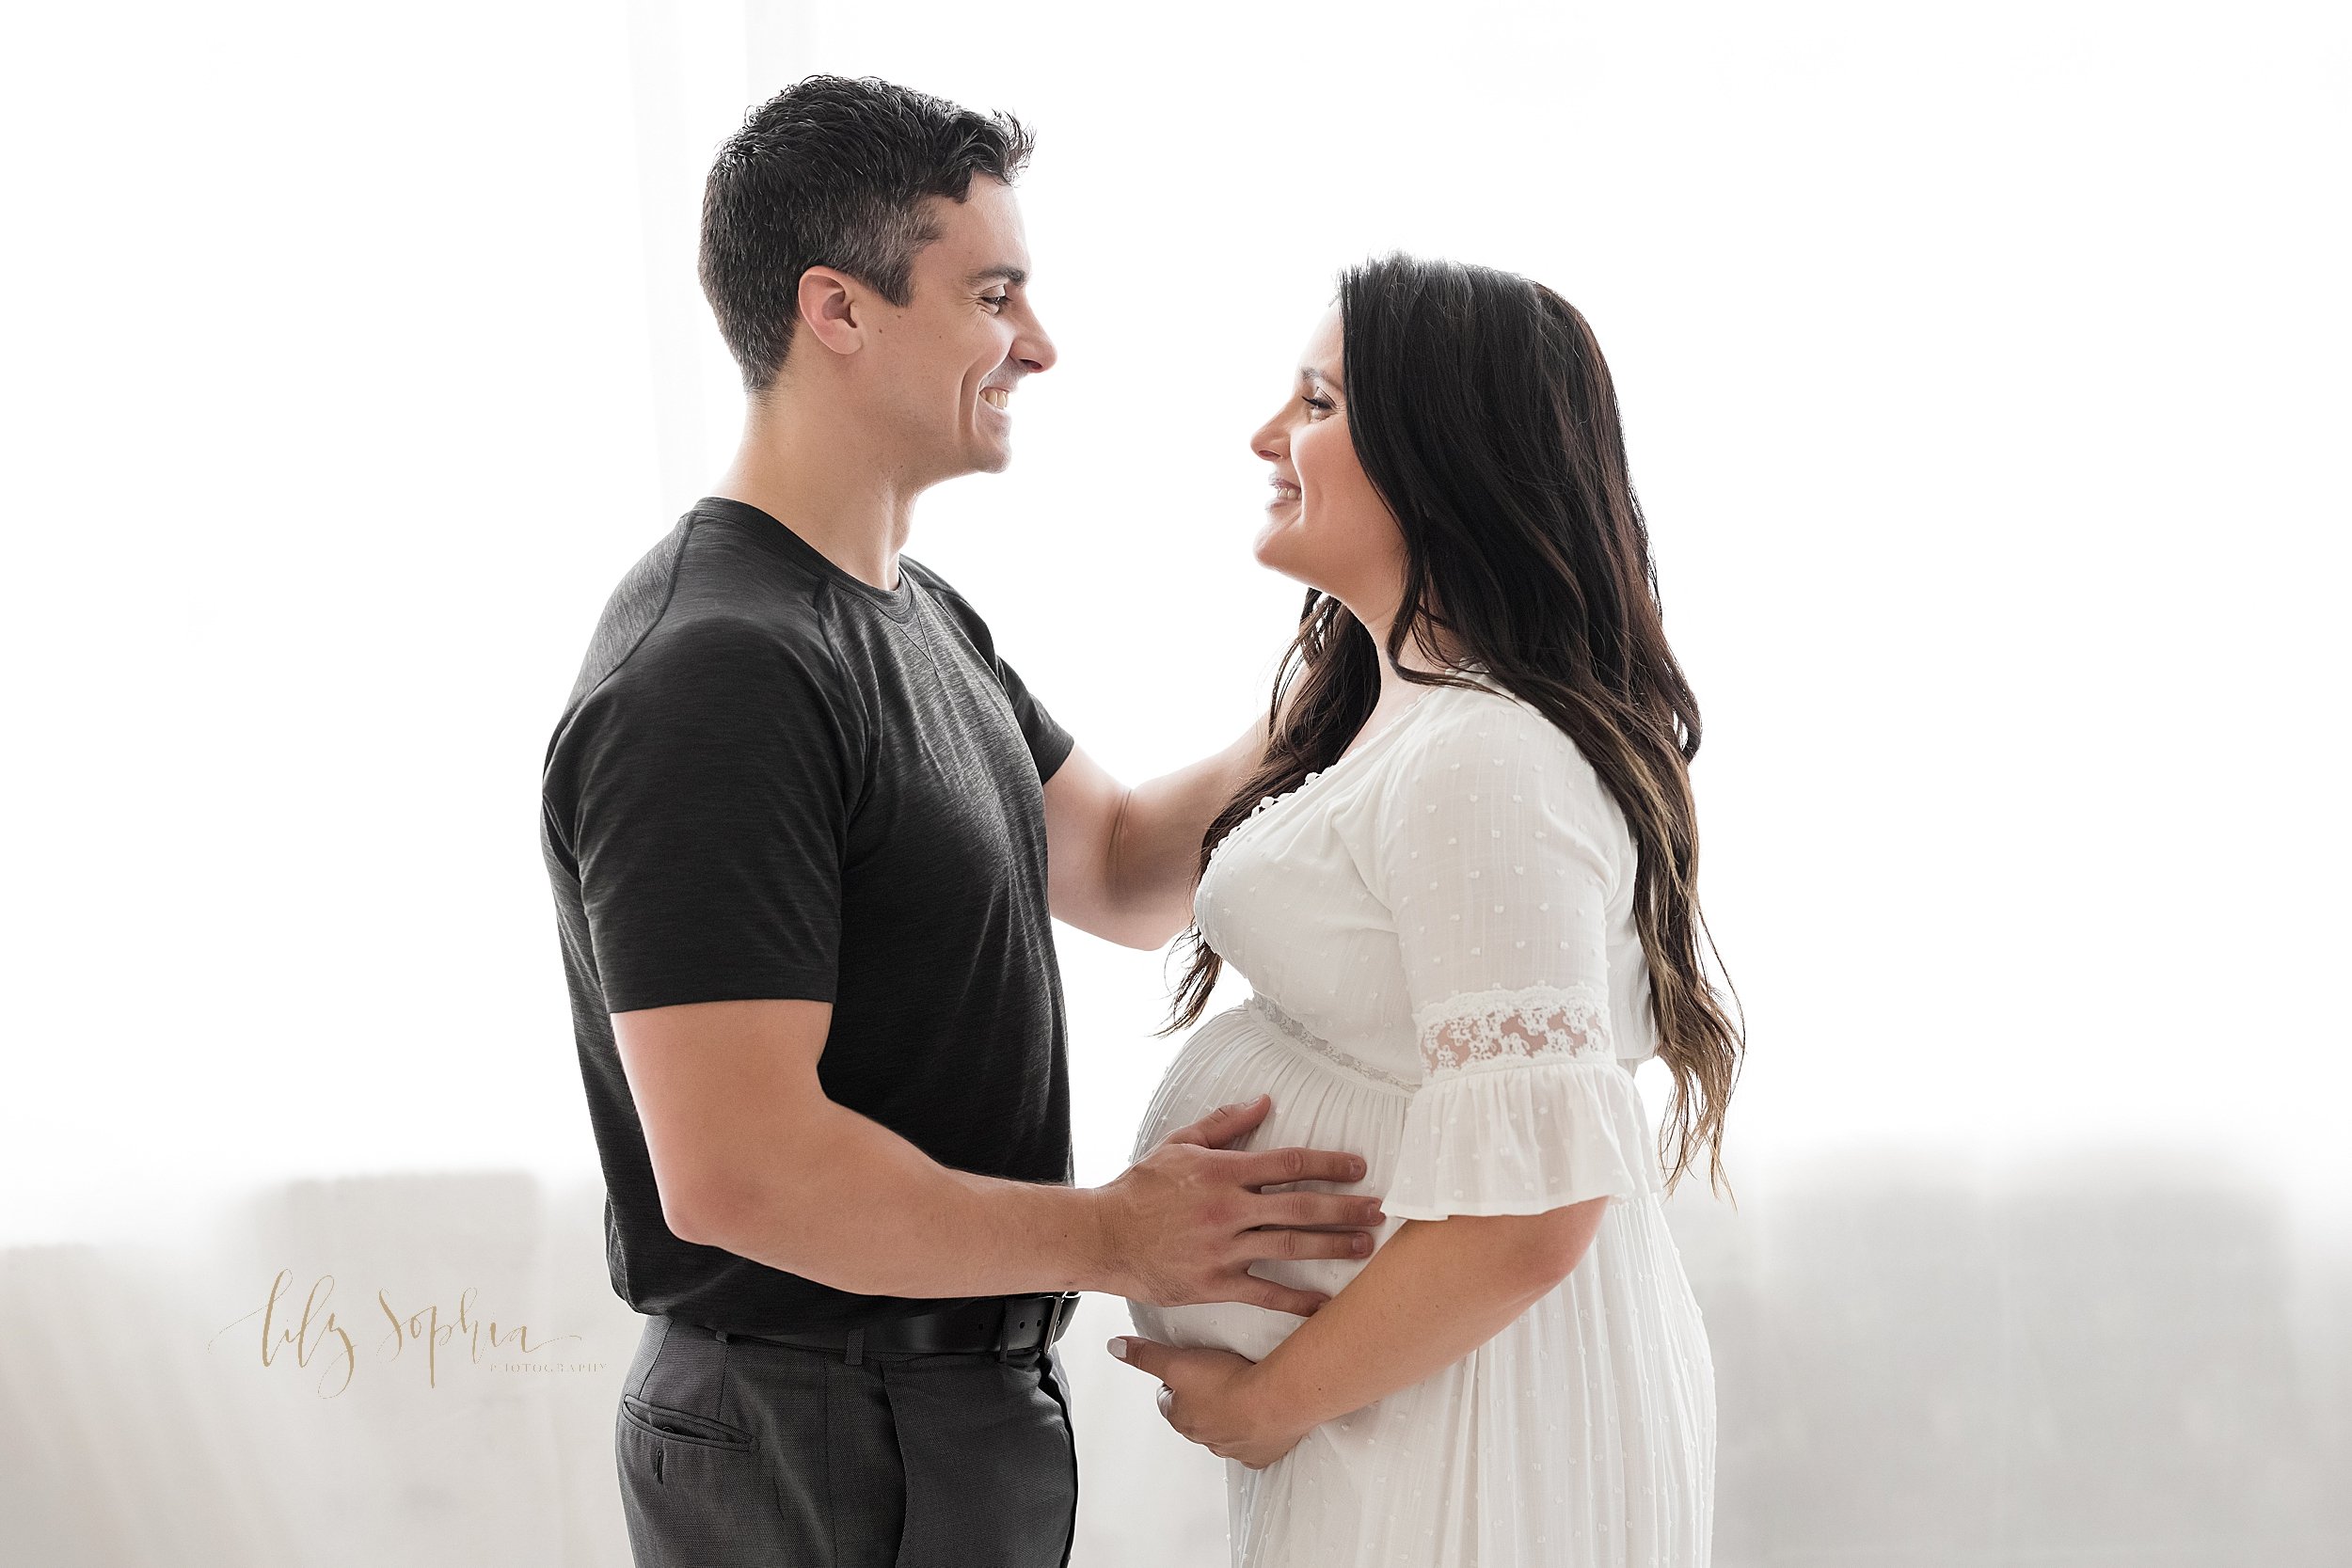  Maternity photo shoot of an expectant couple with the pregnant mother holding the base of her belly as her husband faces her and places his right hand on their child in utero while they stand together in front of a natural light window in a studio i